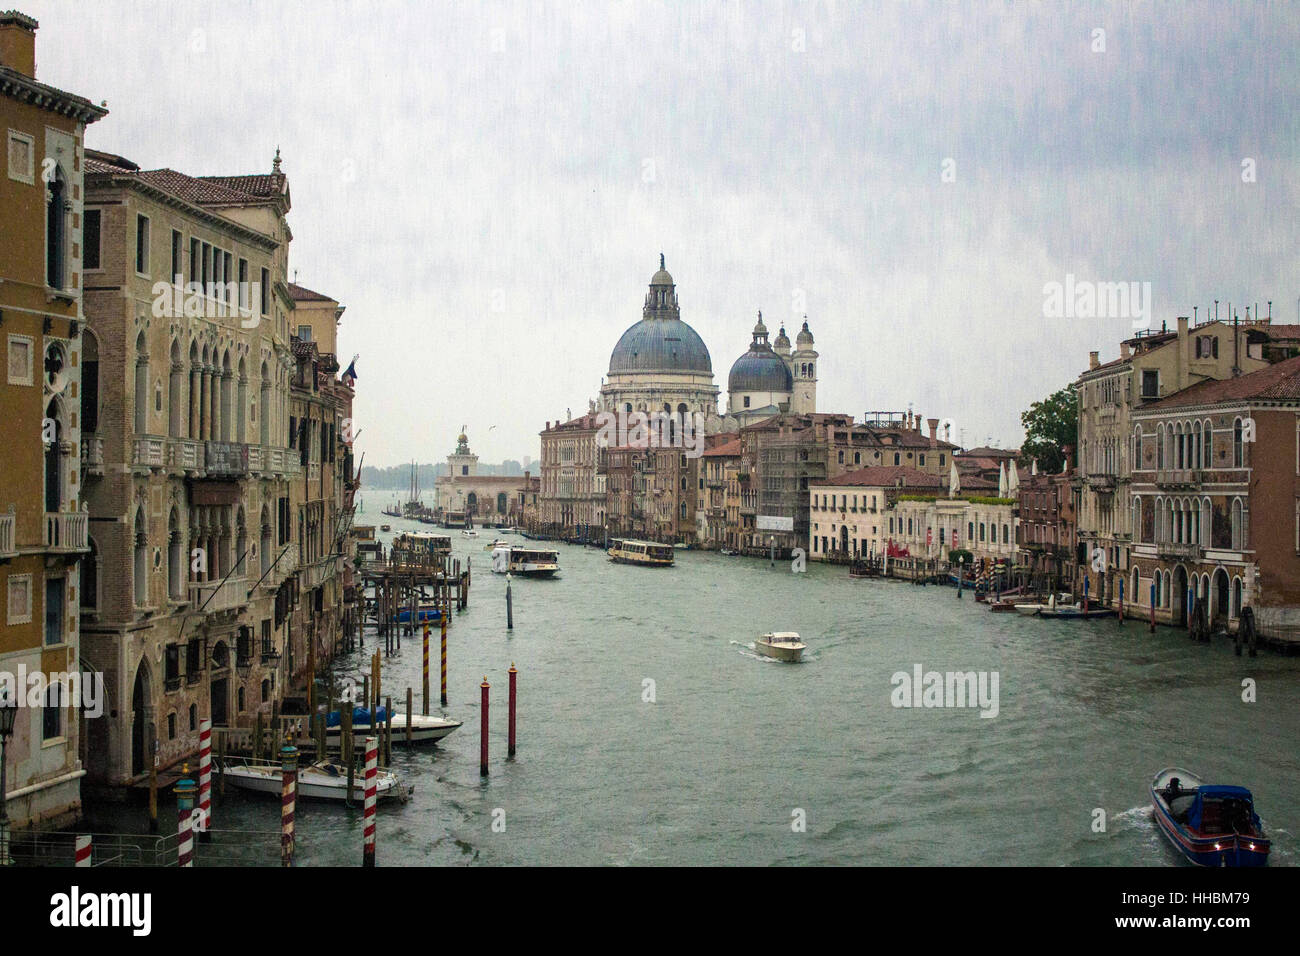 View of the Grand Canal, Venice Italy. Stock Photo